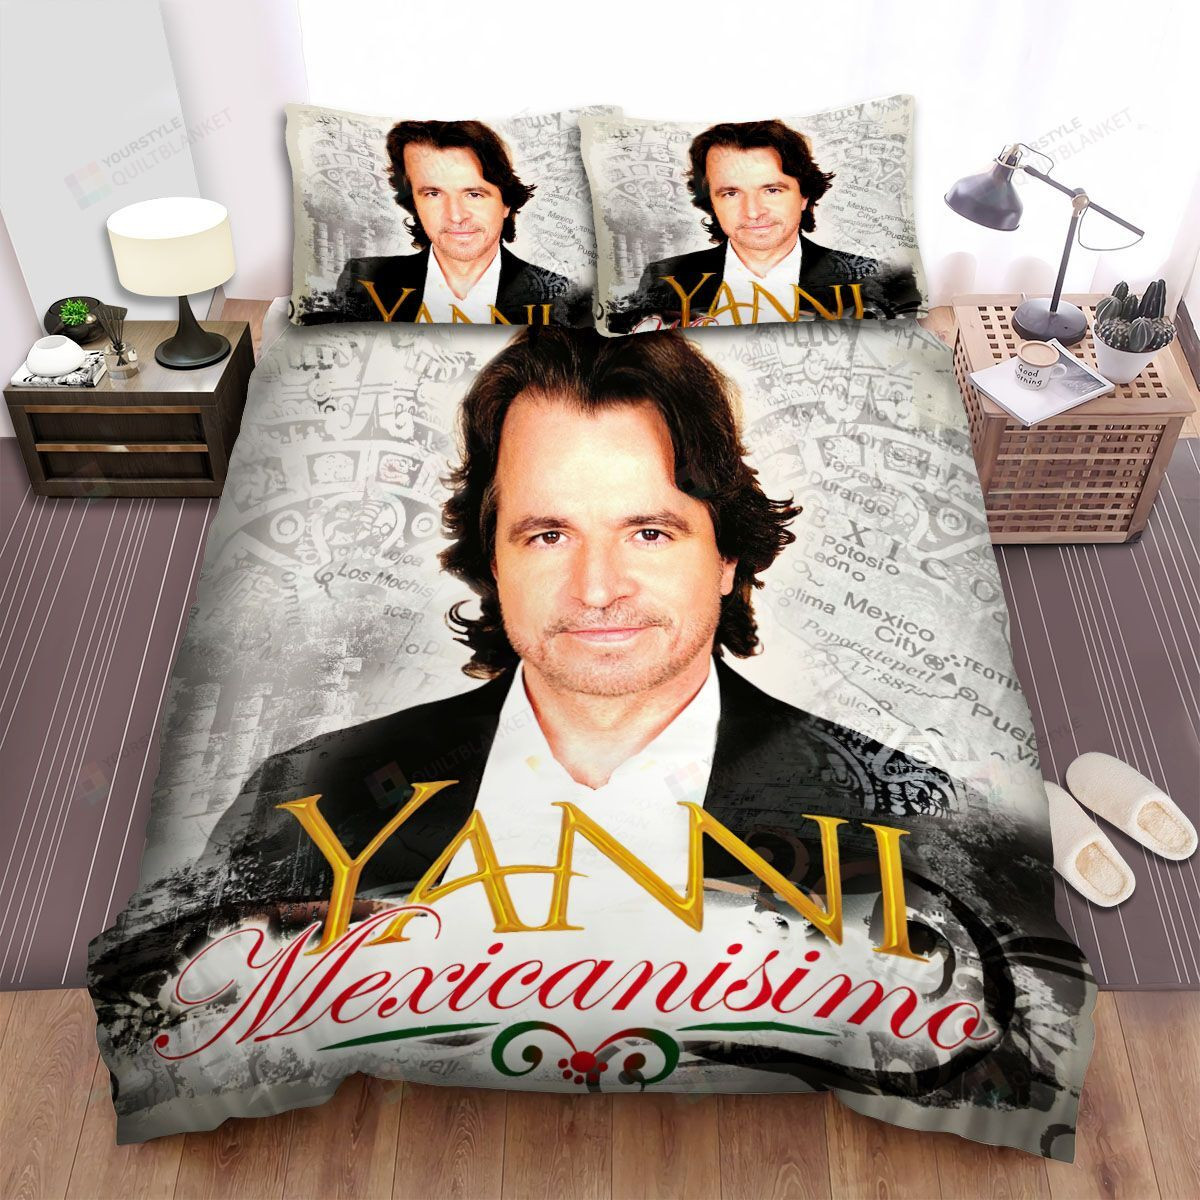 Yanni Mexicanisimo Album Cover Bed Sheets Spread Comforter Duvet Cover Bedding Sets